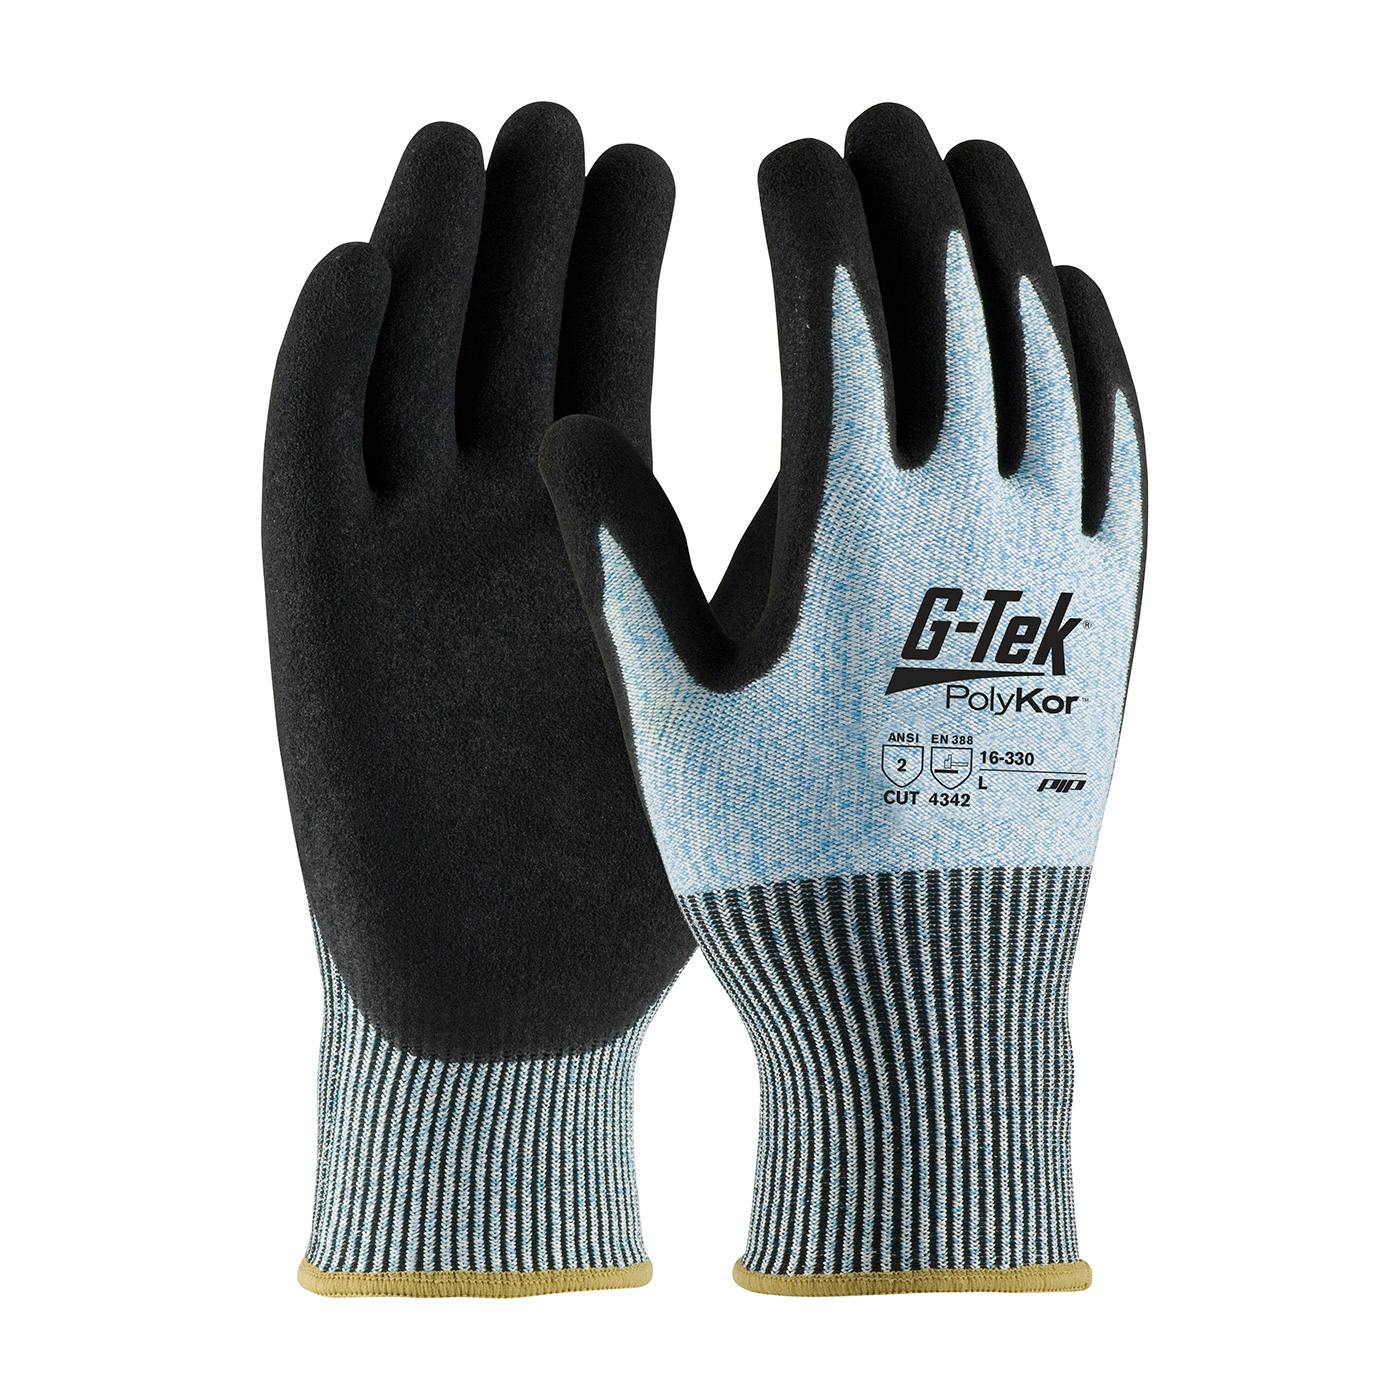 G-Tek® PolyKor® Seamless Knit PolyKor® Blended Glove with Double-Dipped Nitrile Coated MicroSurface Grip on Palm & Fingers (16-330)_0